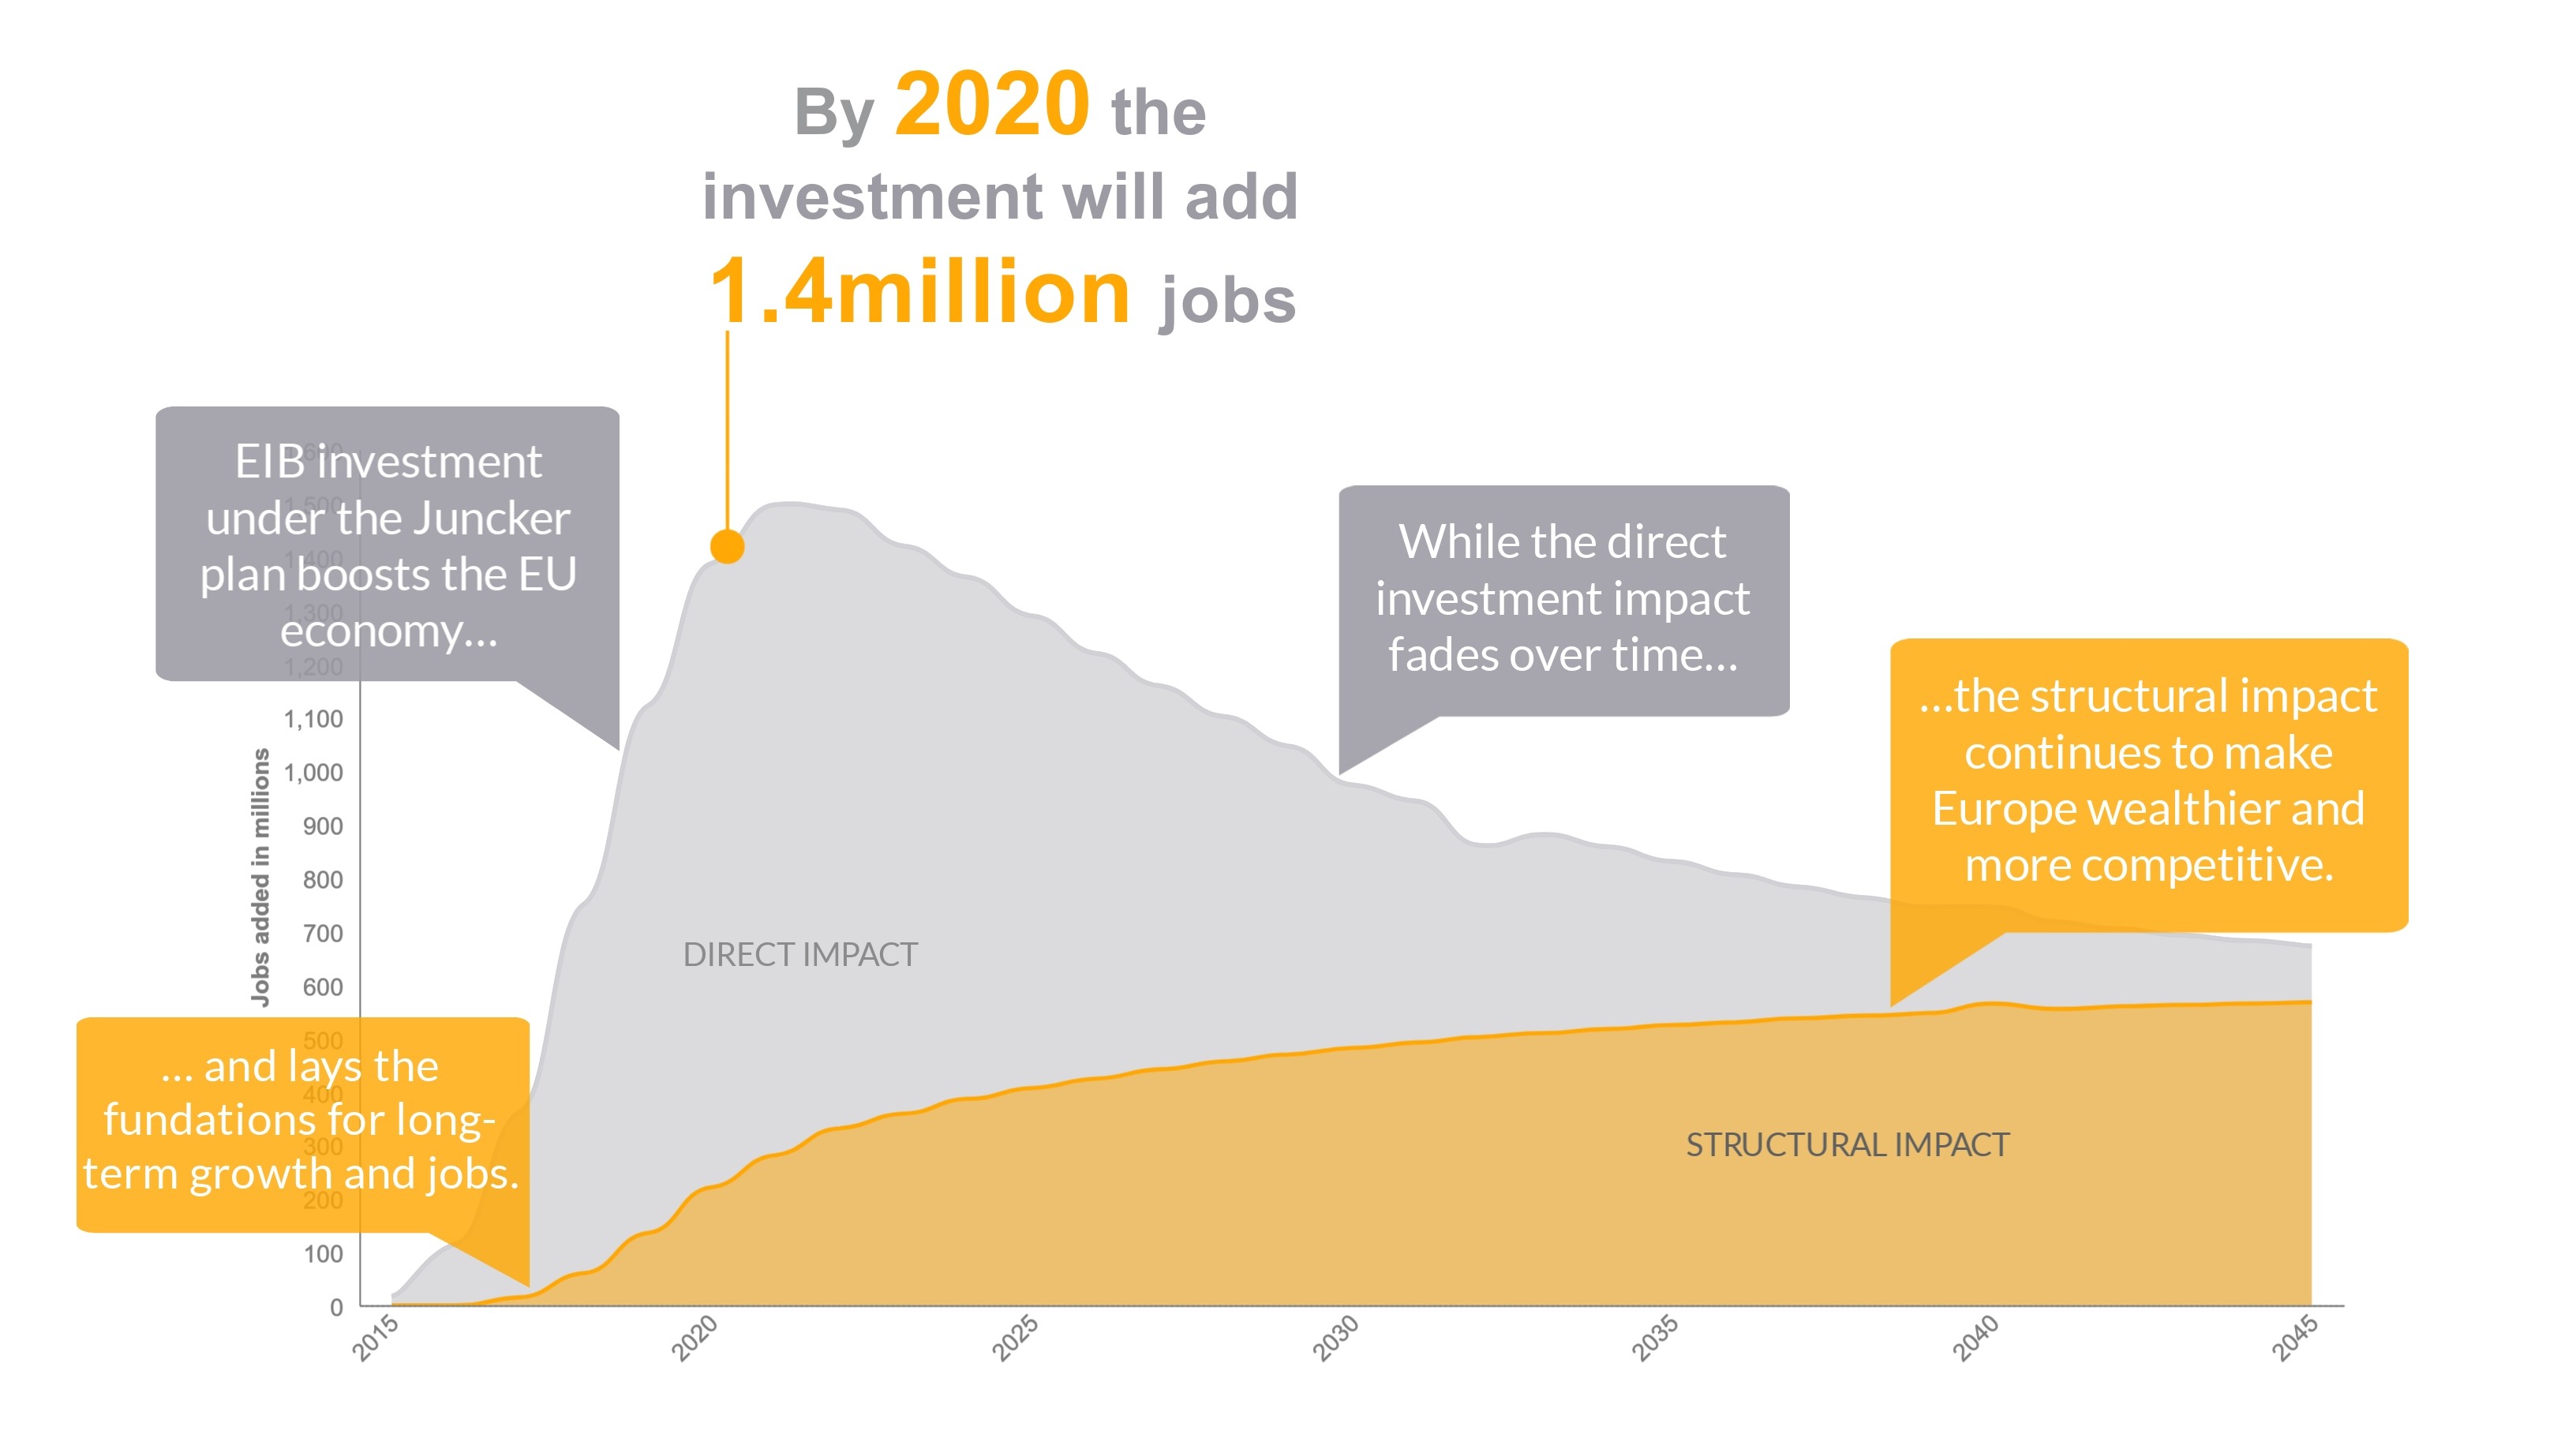 By 2020 the investment will add 1.4 million jobs